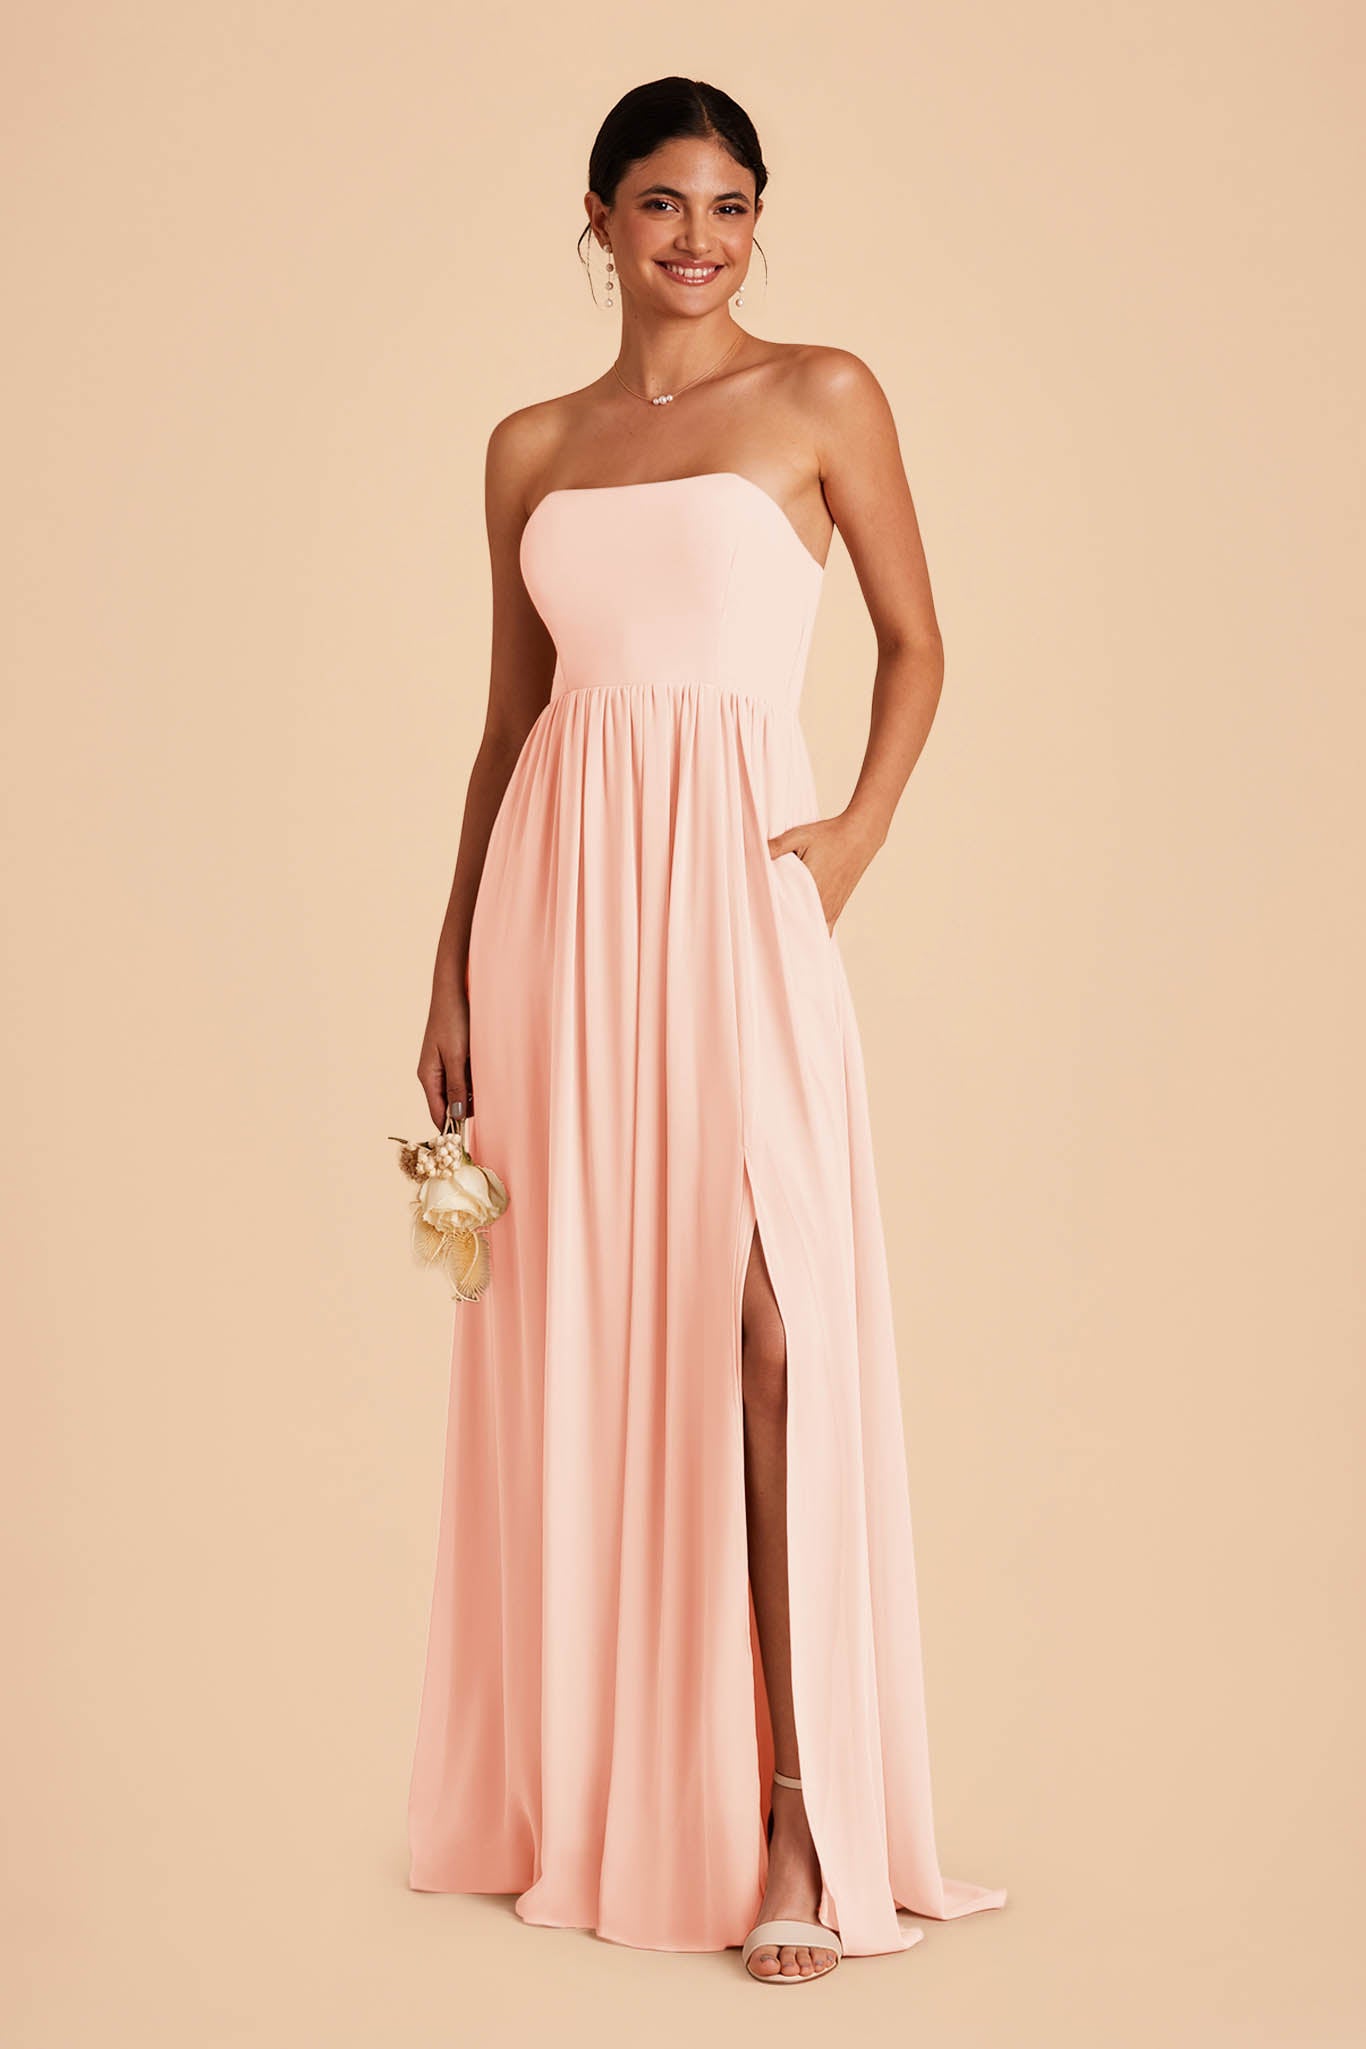 Blush Pink August Convertible Dress by Birdy Grey